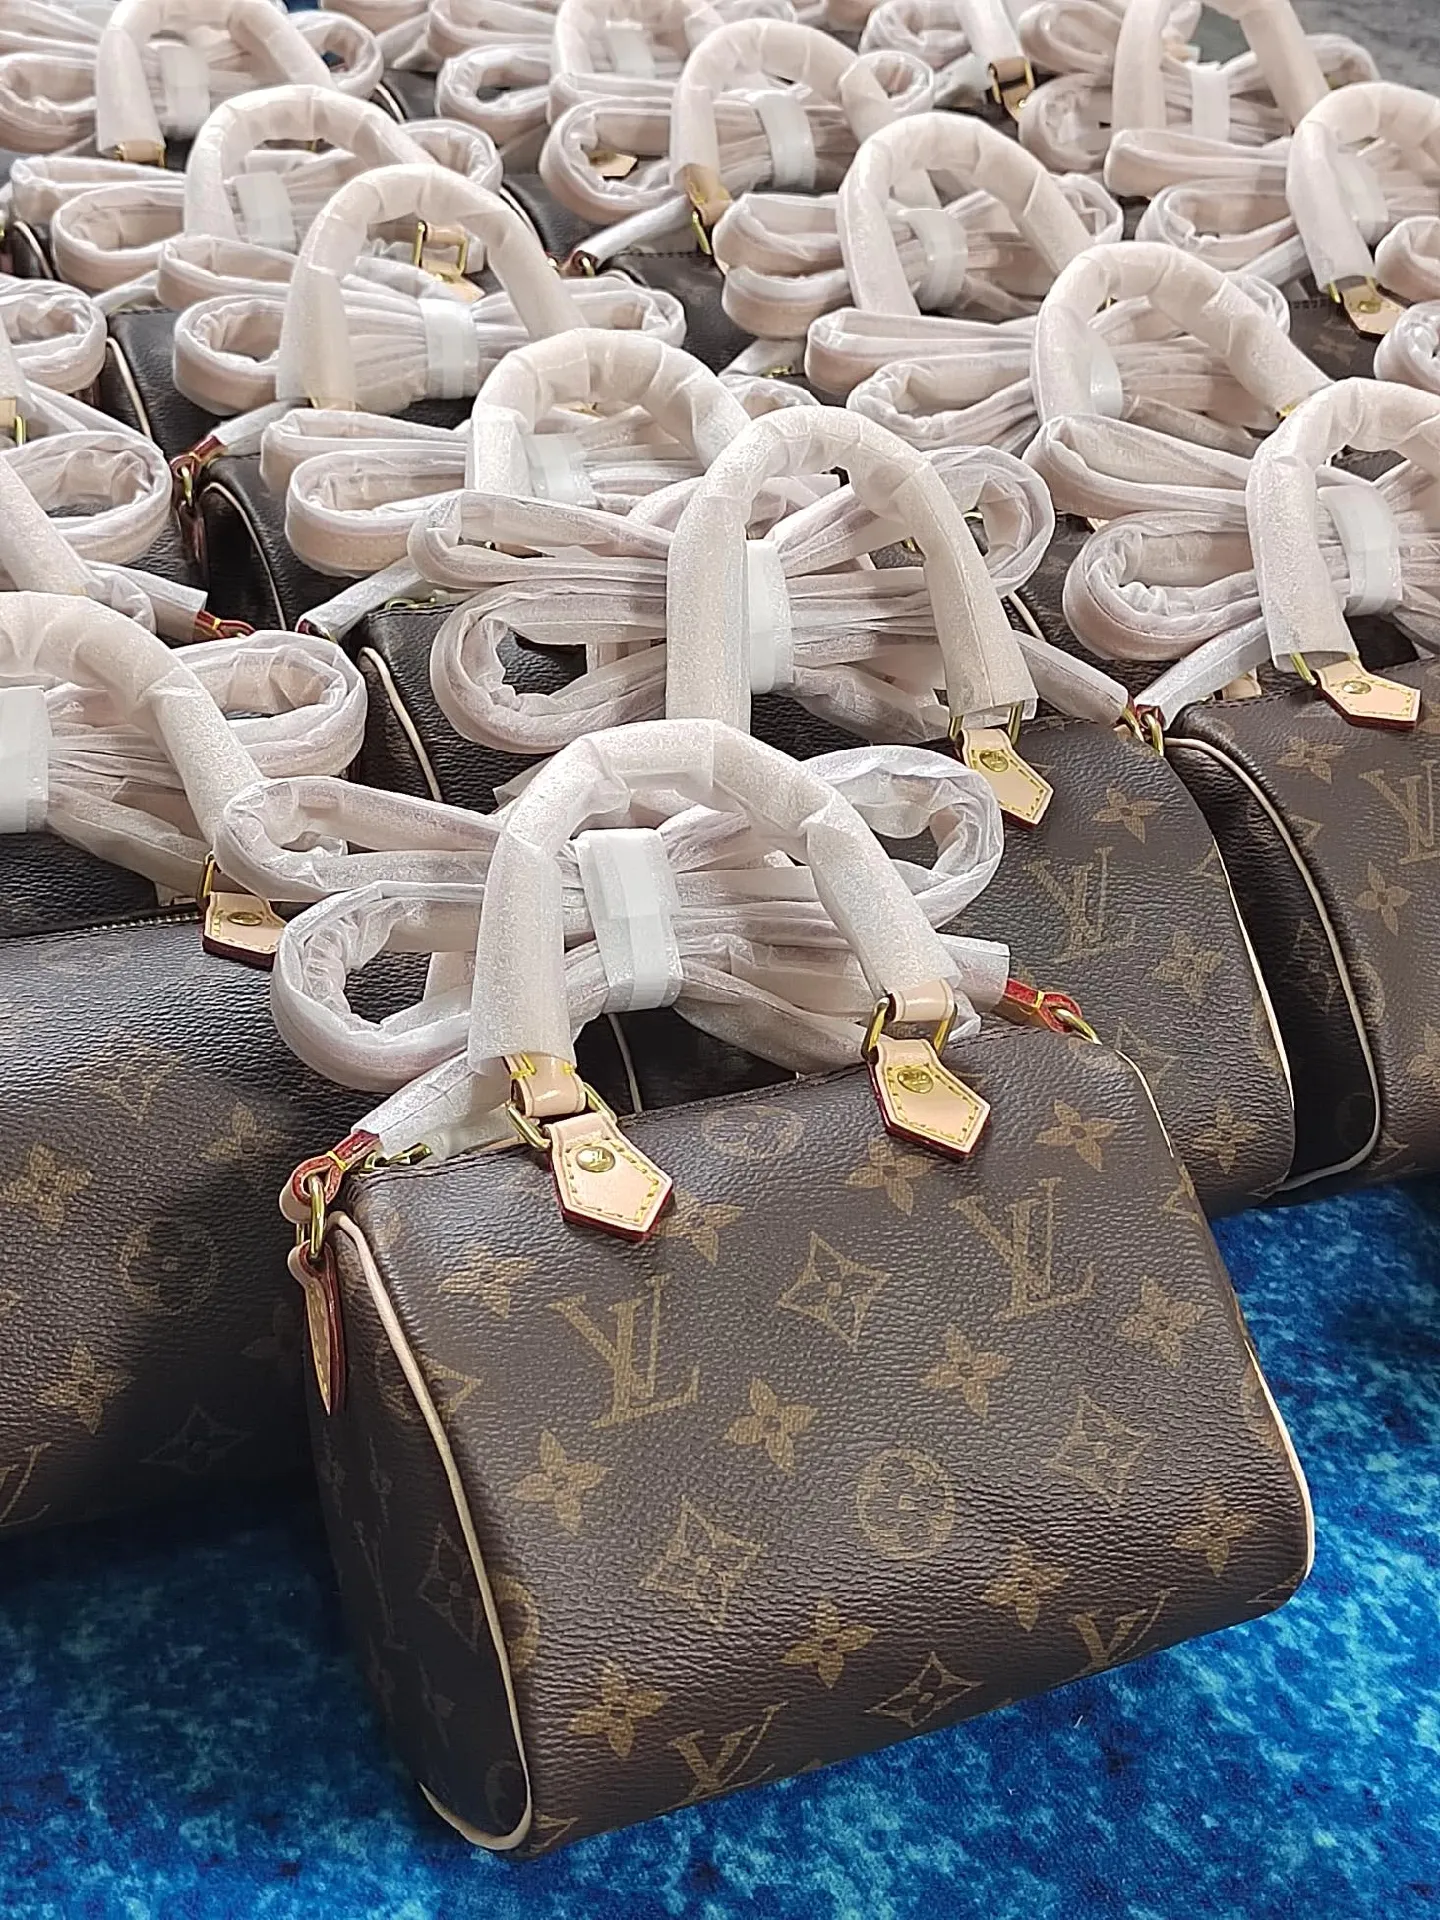 My Real Thoughts on the LV Speedy 35, Gallery posted by Shaelen Serrano